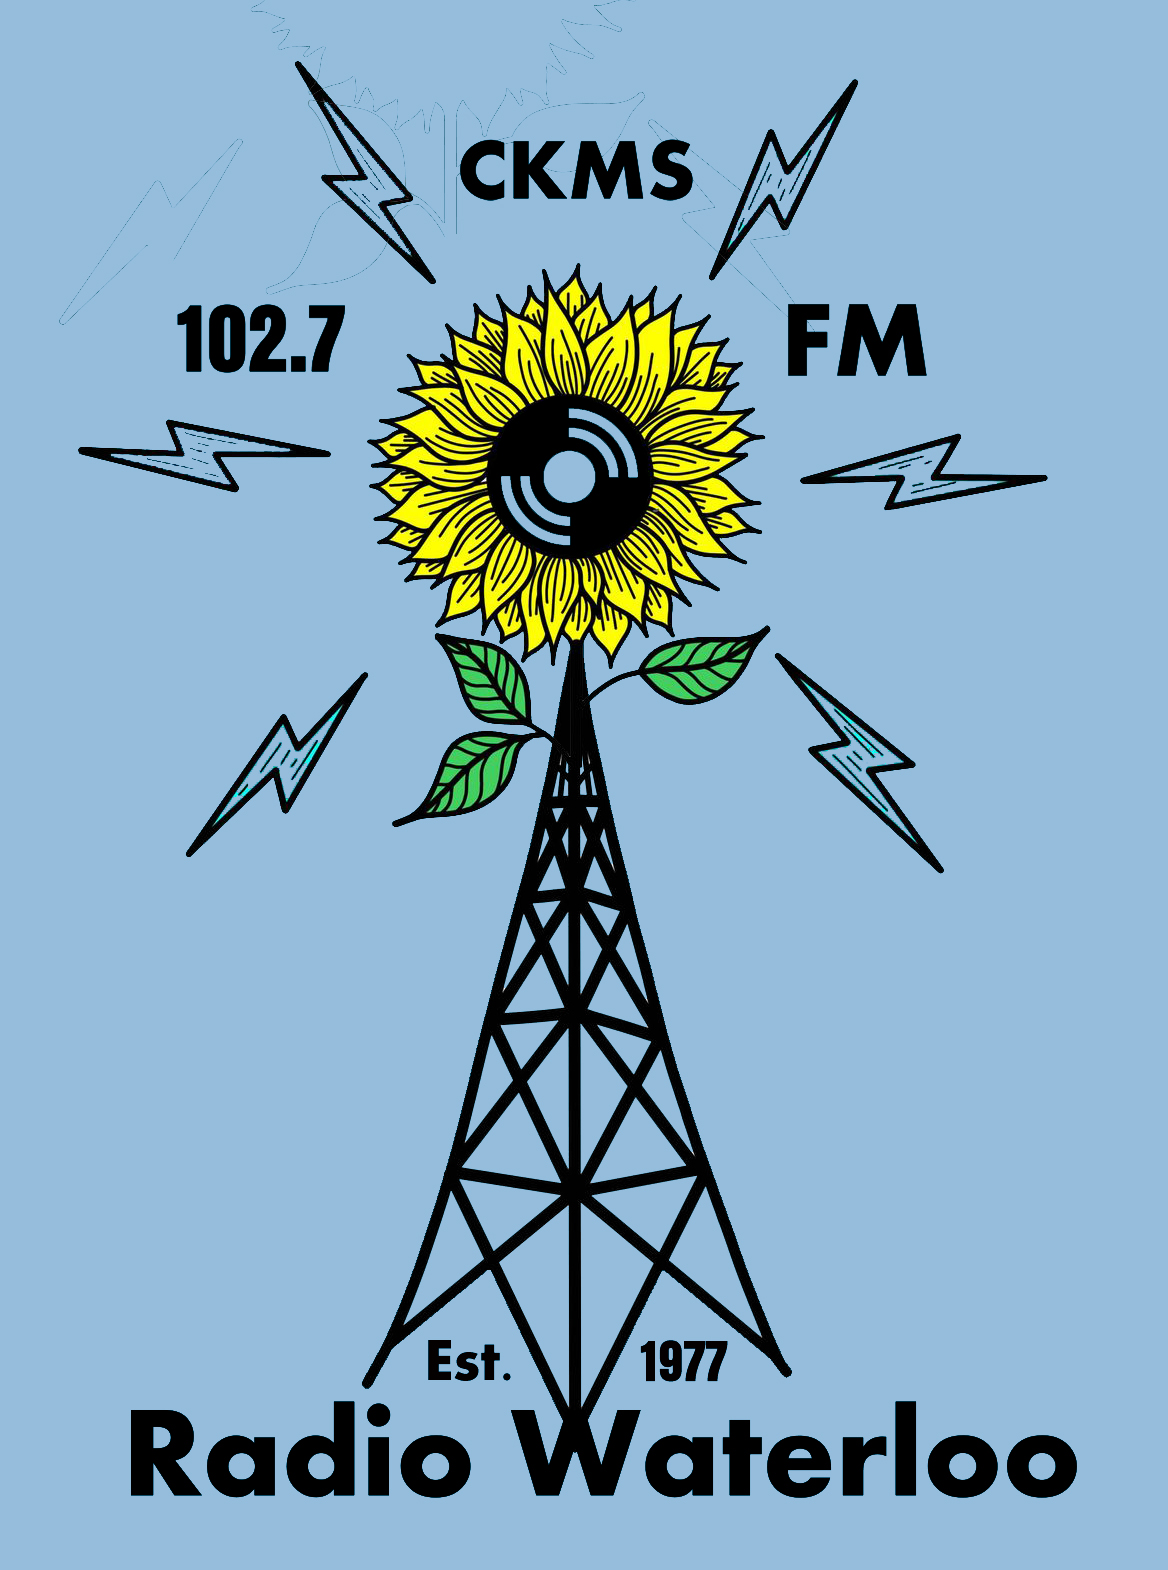 CKMS 102.7 FM | Est. 1977 | Radio Waterloo (illustration of a sunflower on top of a transmitter tower with radio waves coming off the flower)